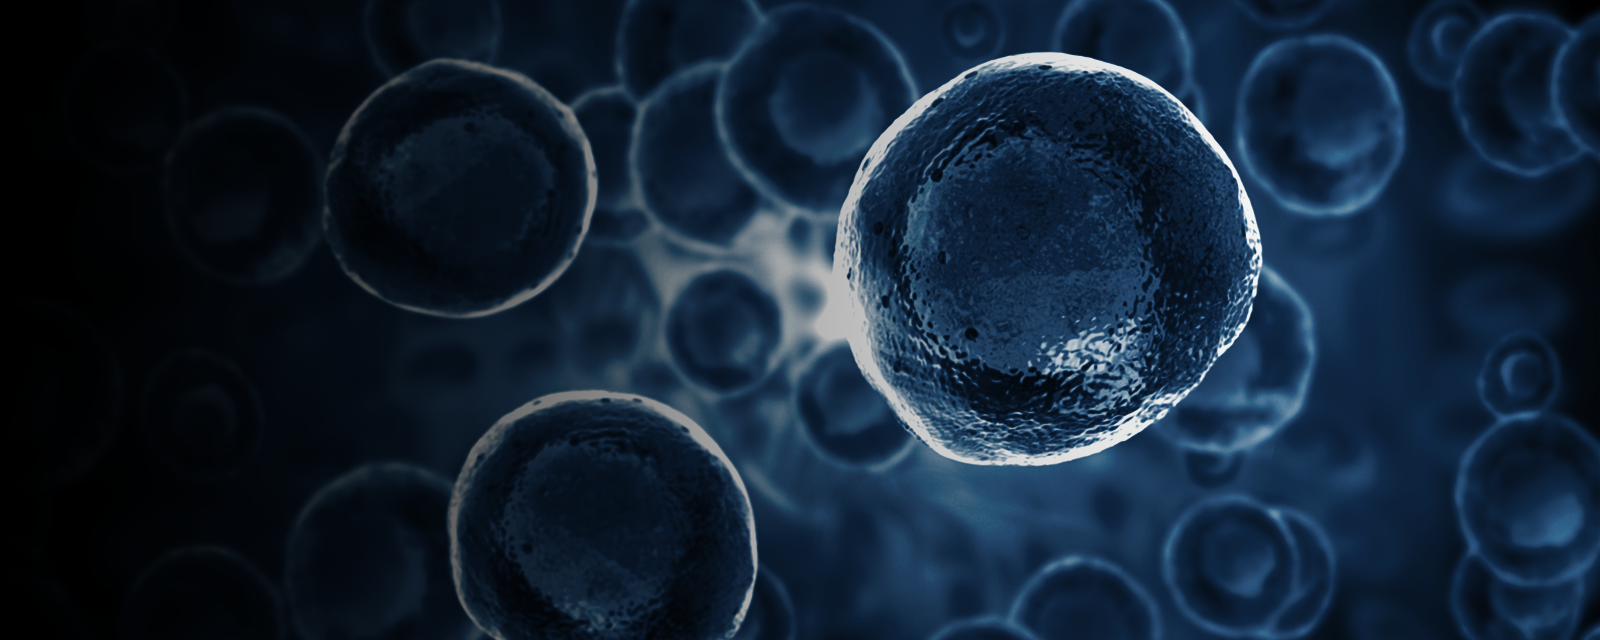 embryonic stem cells_function-1600x640